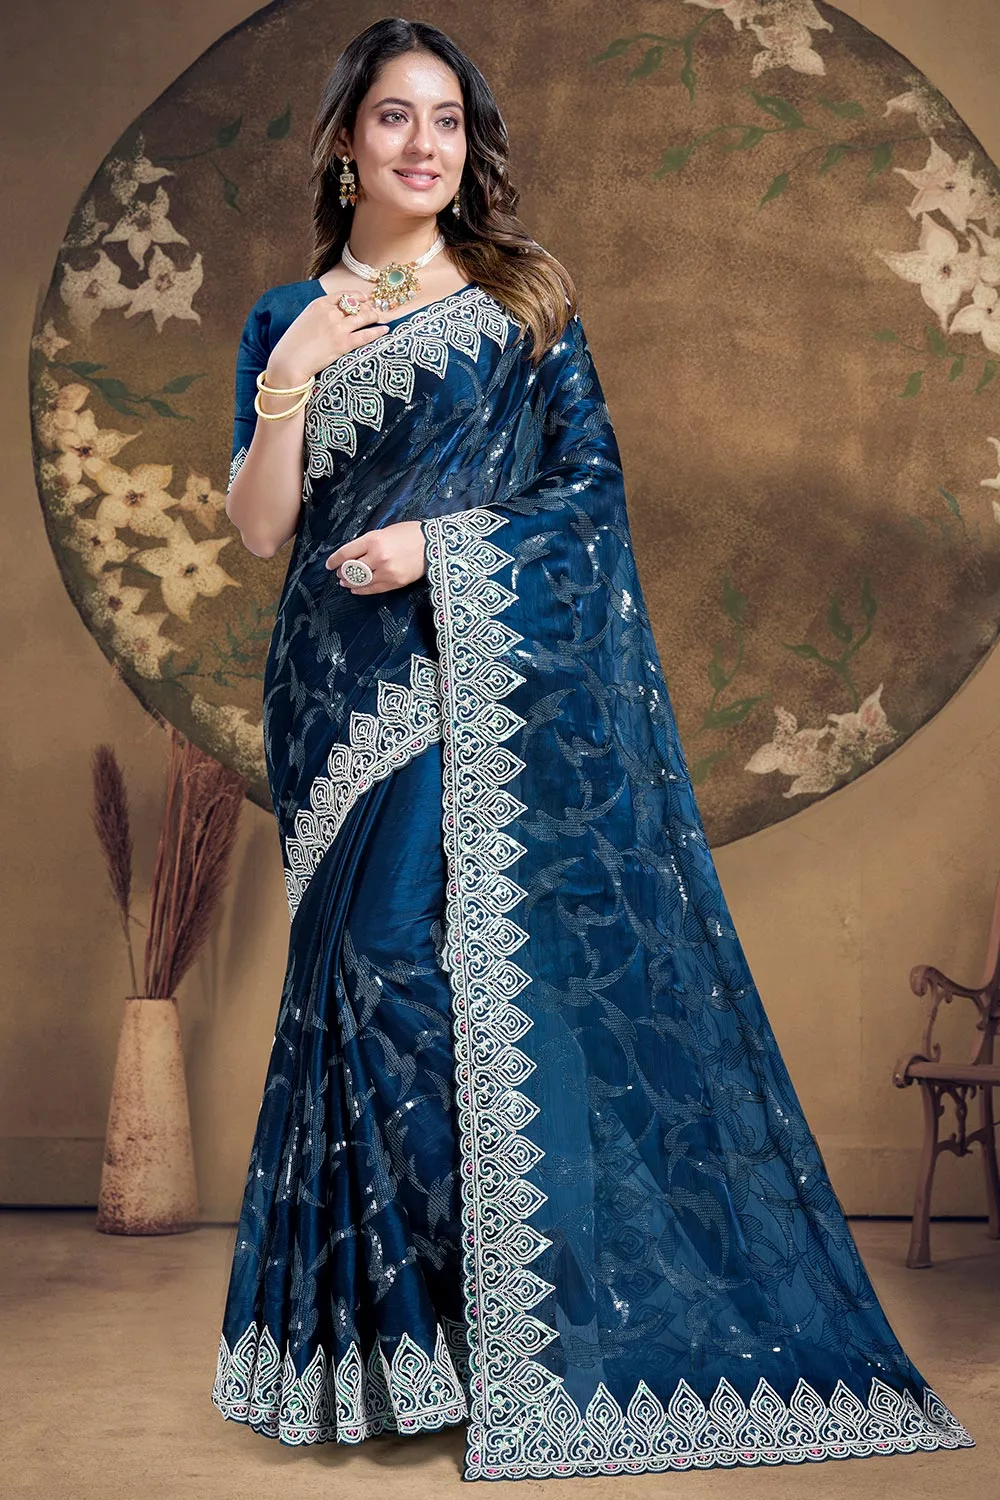 Morpeach Silk Saree: Heavy Sequence Embroidered Work with Matching Blouse